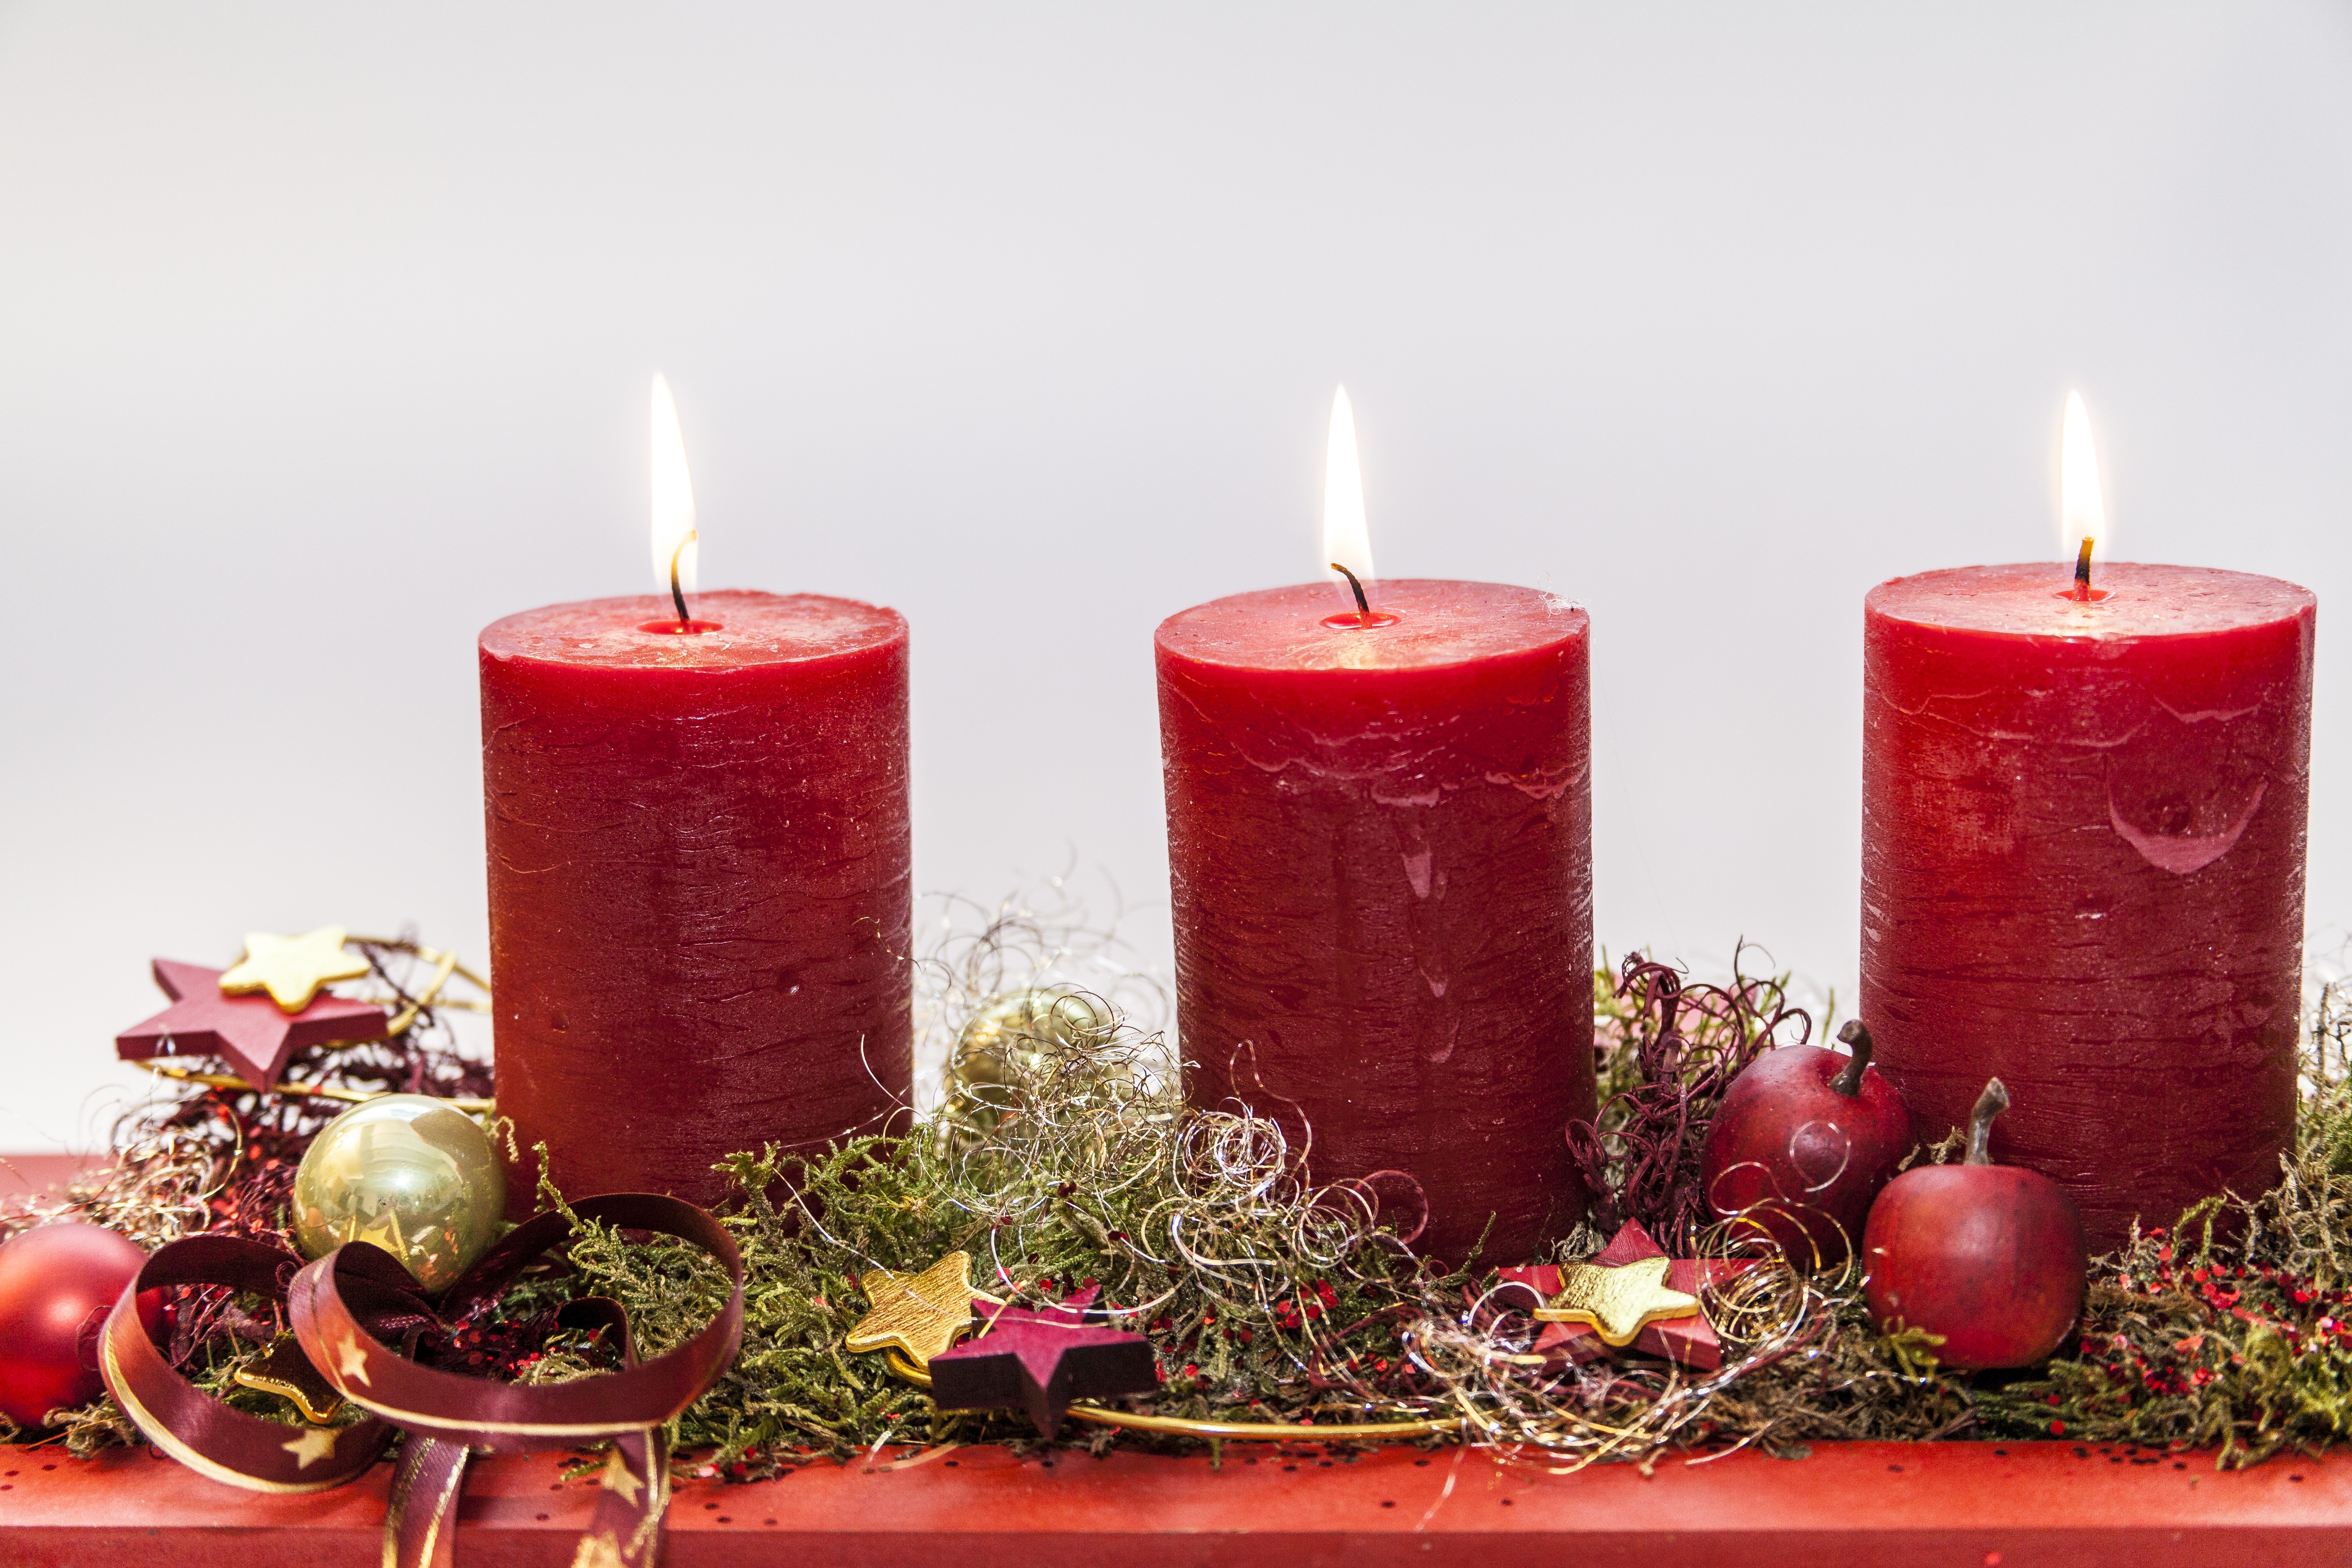 close-up photo of three red pilar candles